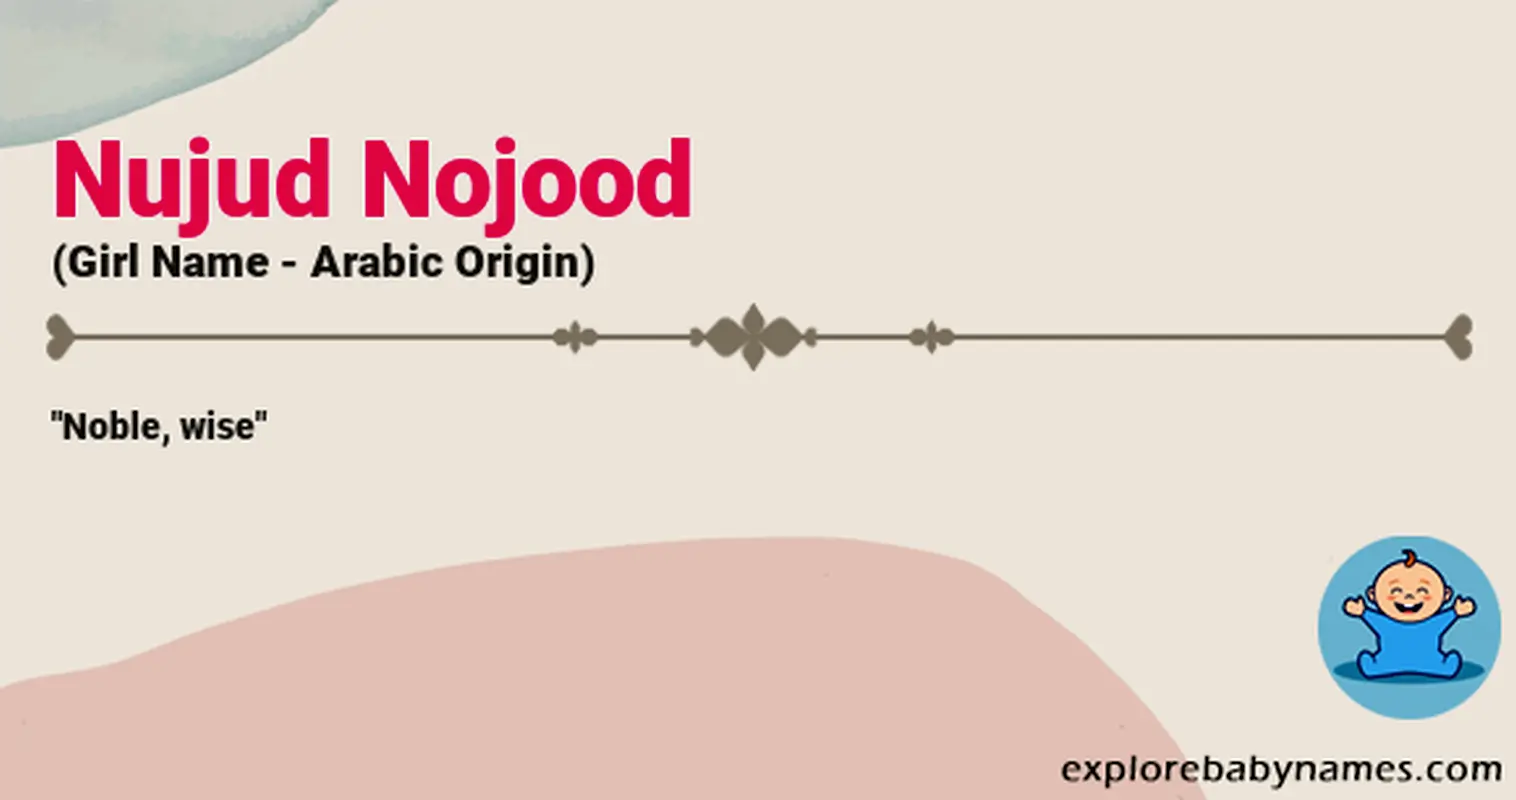 Meaning of Nujud Nojood